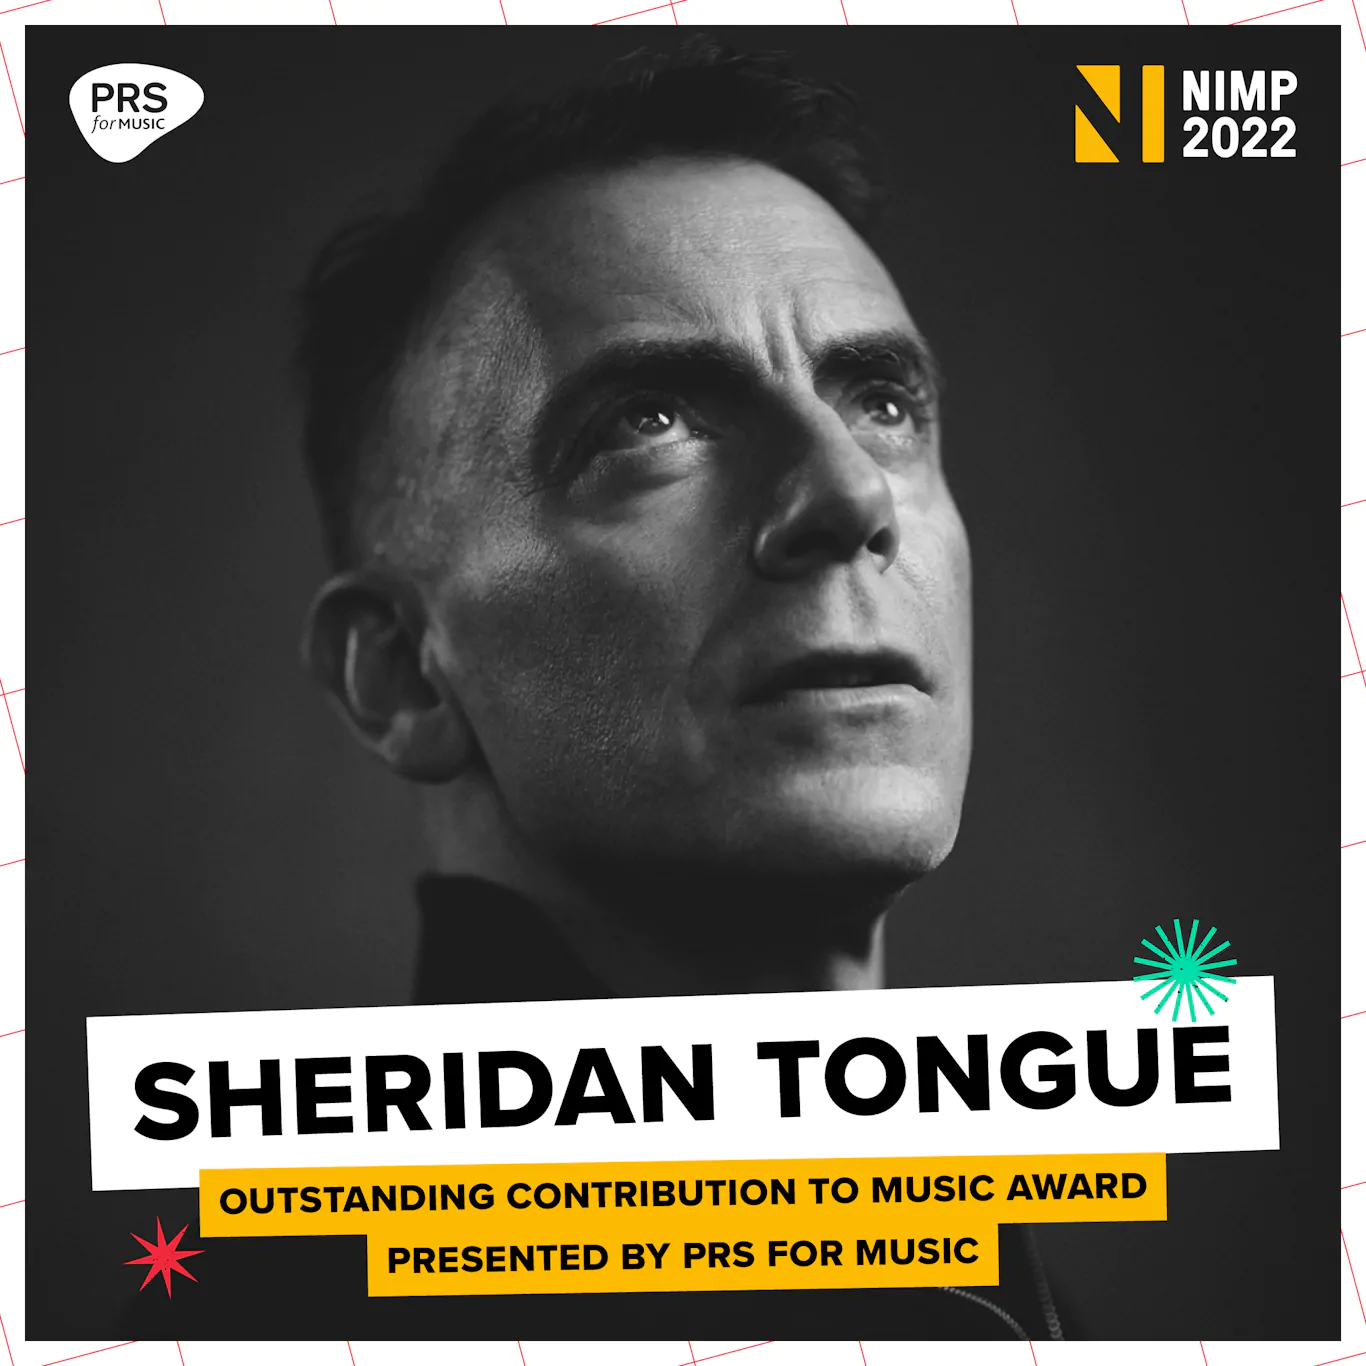 Sheridan Tongue to receive Outstanding Contribution to Music Award at N.I. Music Prize on Wednesday 16 November from PRS for Music